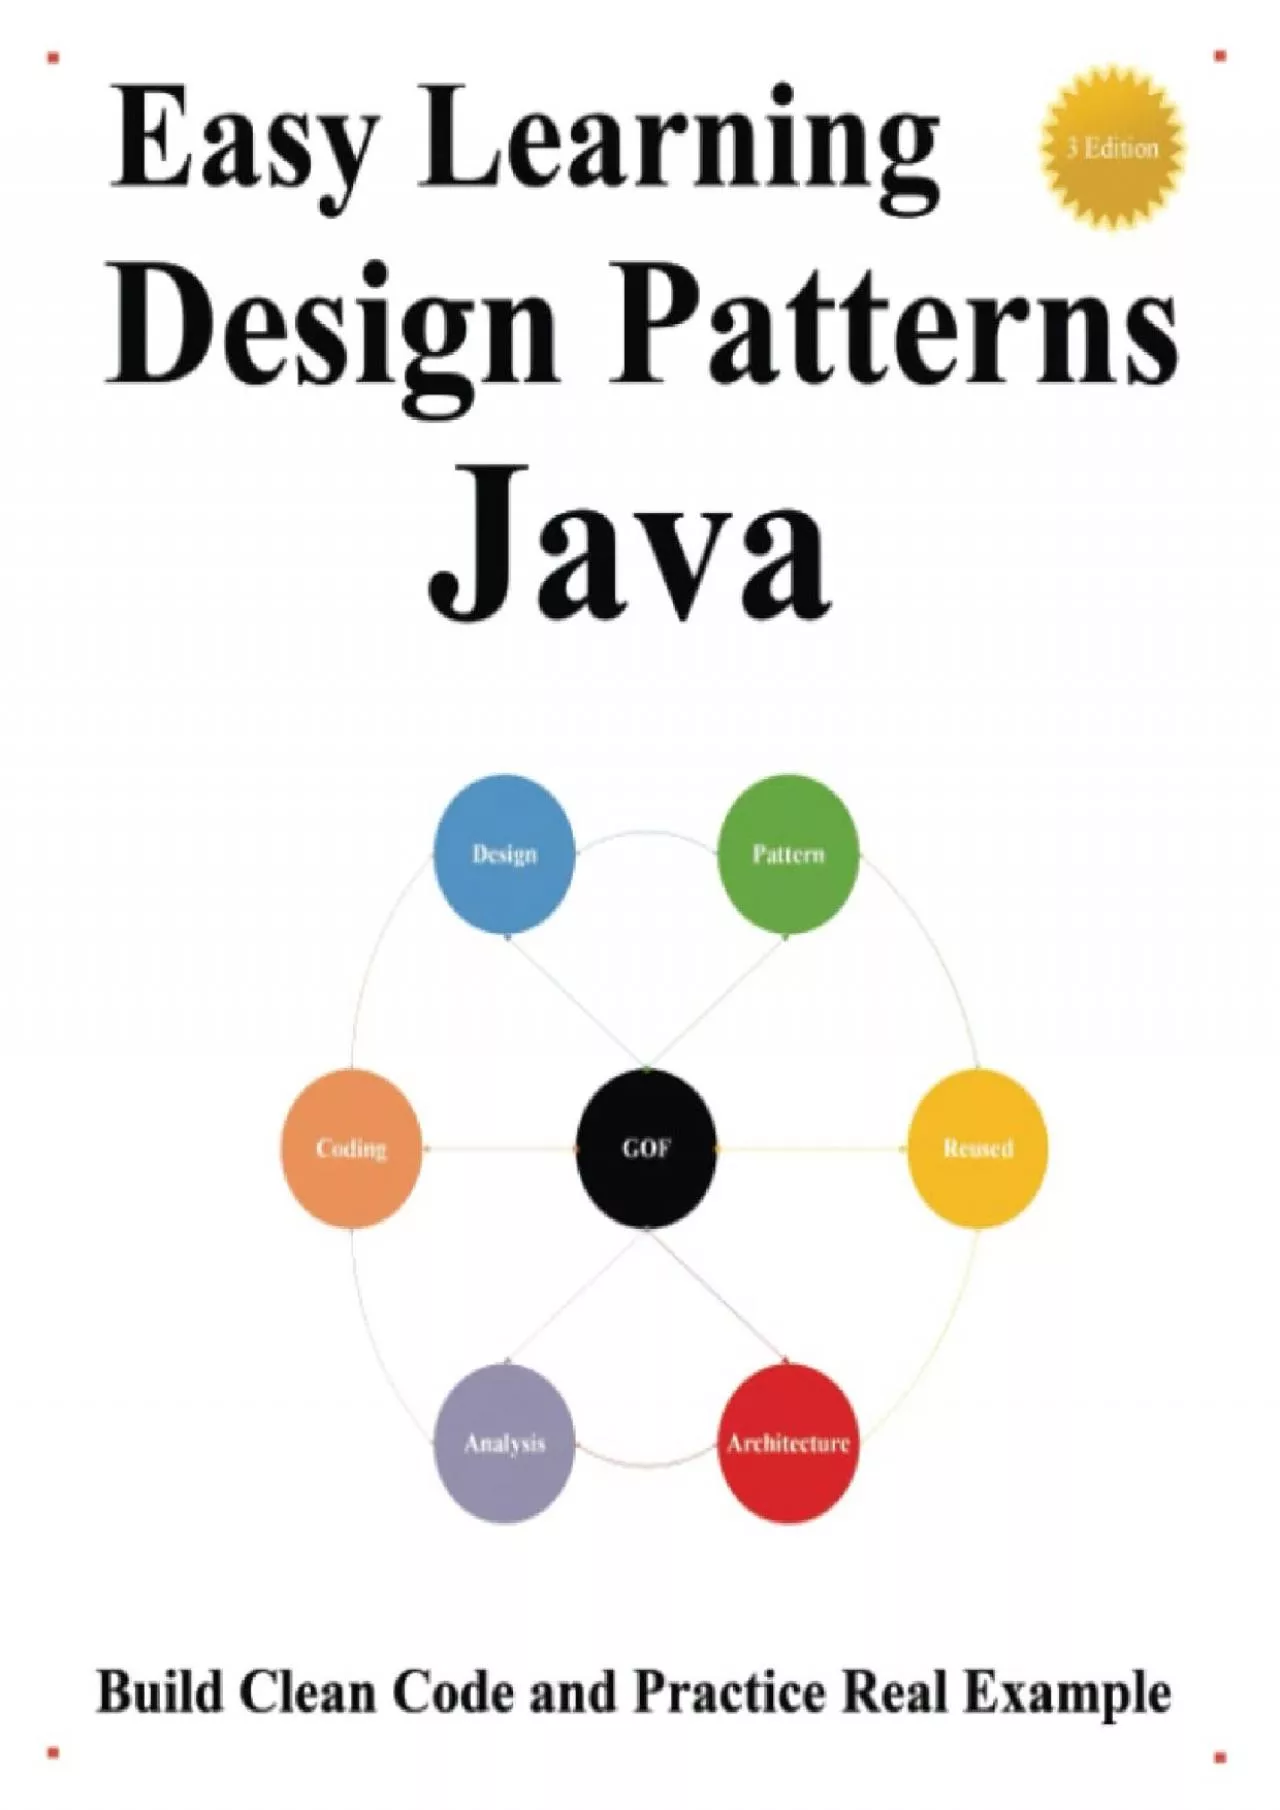 [READ]-Easy Learning Design Patterns Java (3 Edition): Build Clean Code and Practice Real